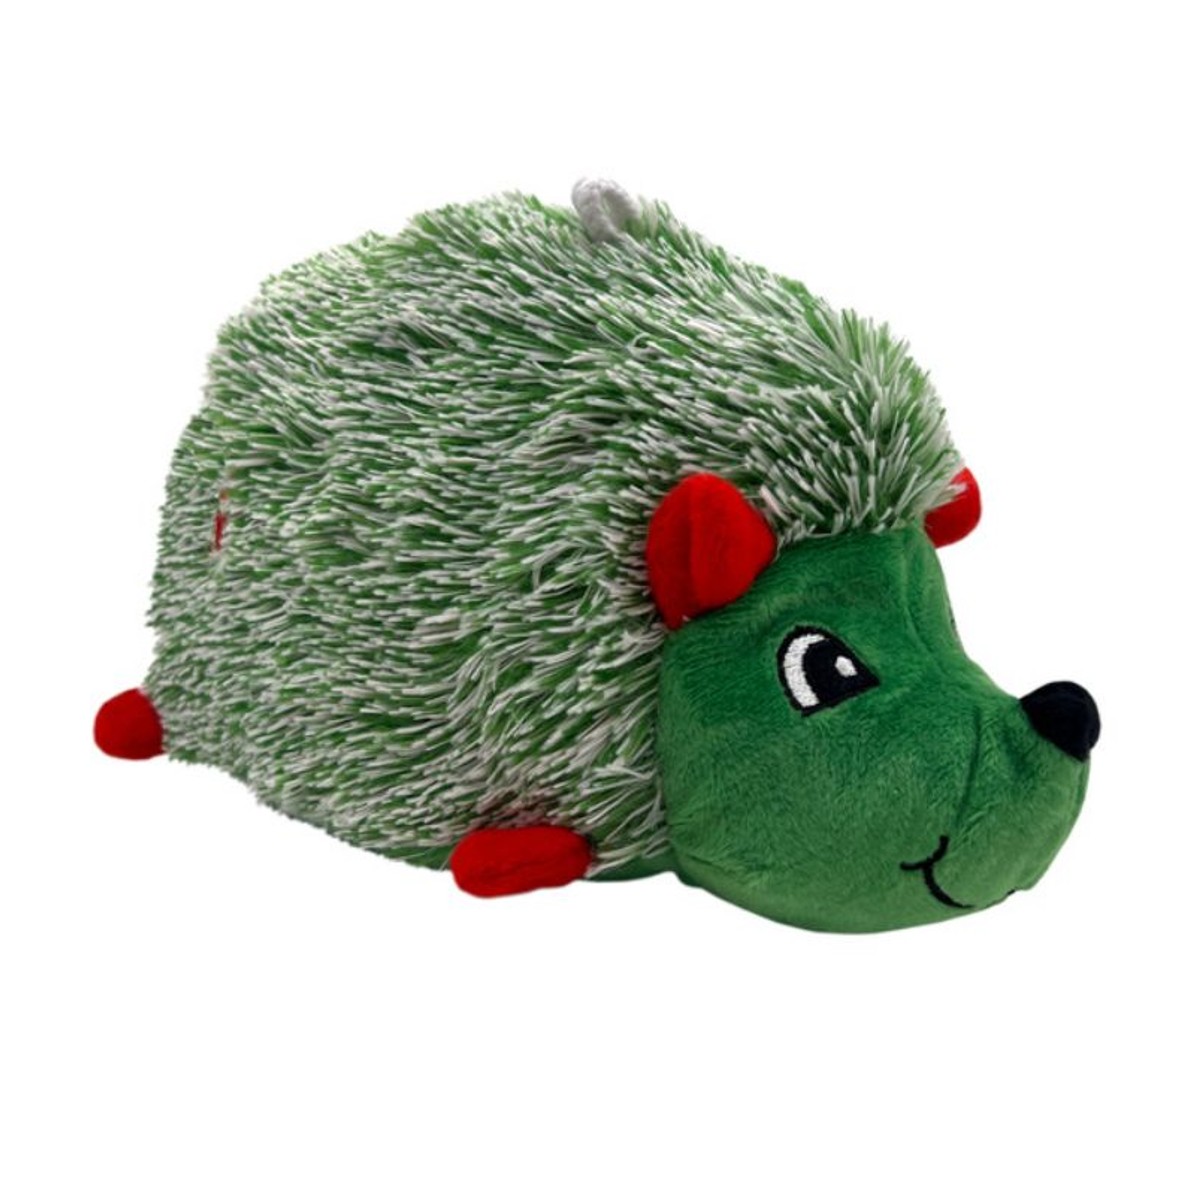 KONG Holiday Comfort Hedgehug Dog Toy - Green with Red Snowflake